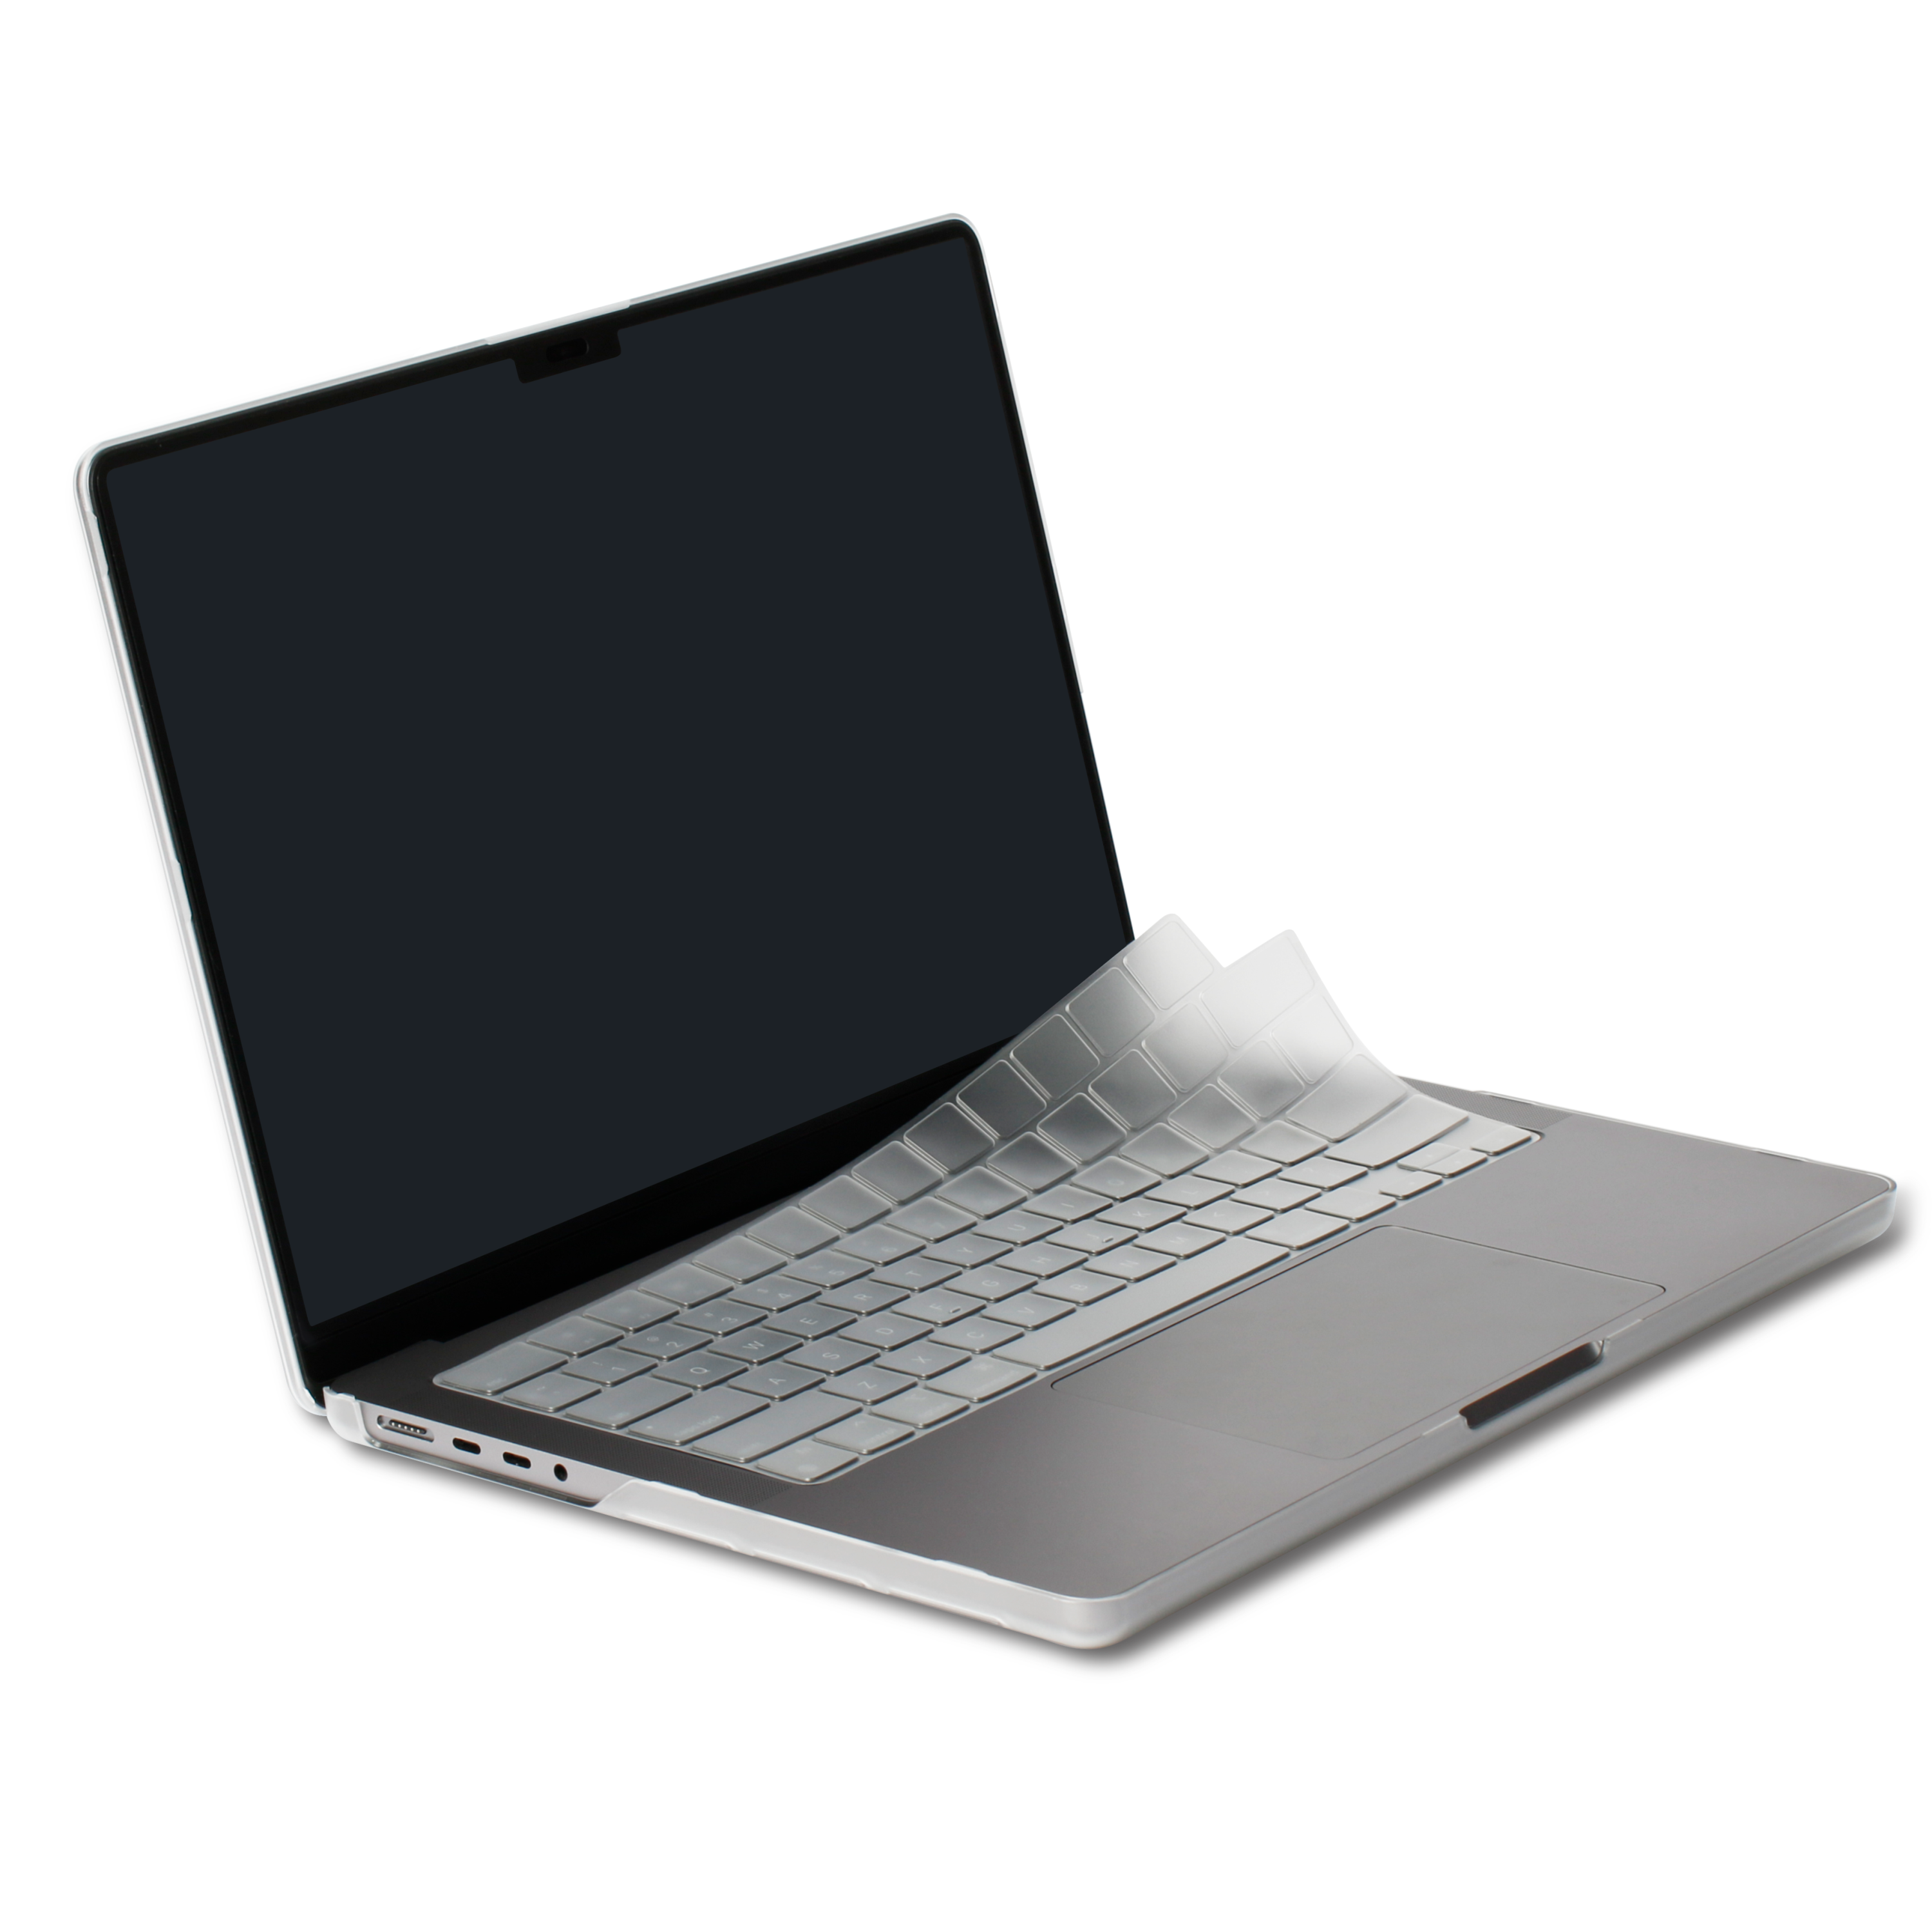 MacBook Air keyboard cover, screen protector and cleaner